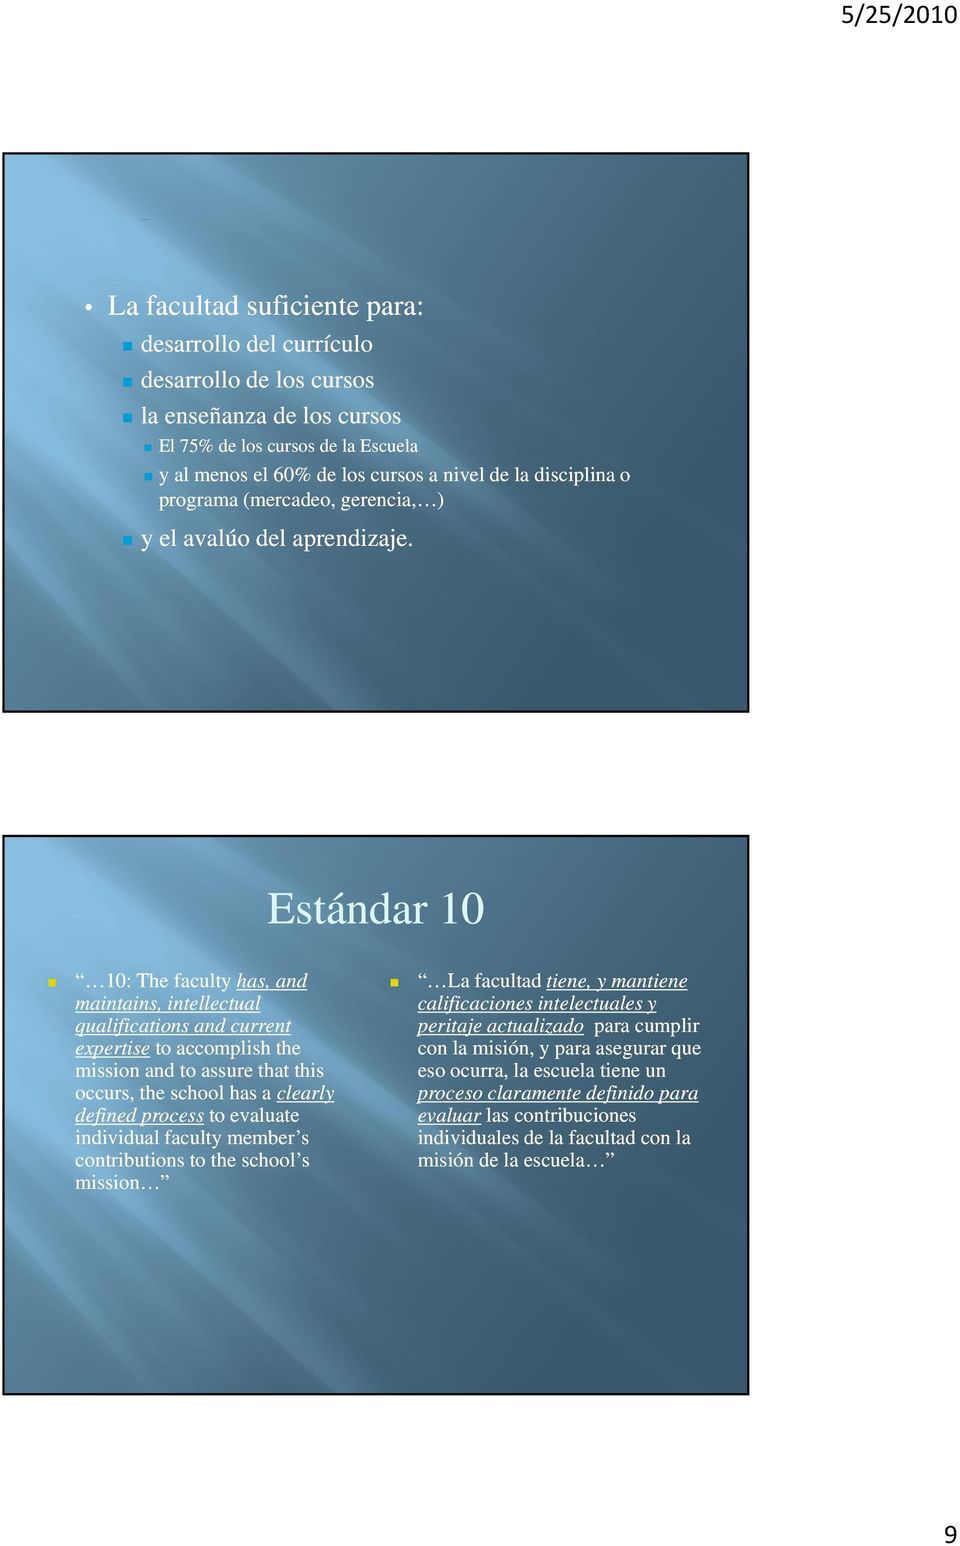 Estándar 10 10: The faculty has, and maintains, intellectual qualifications and current expertise to accomplish the mission and to assure that this occurs, the school has a clearly defined process to